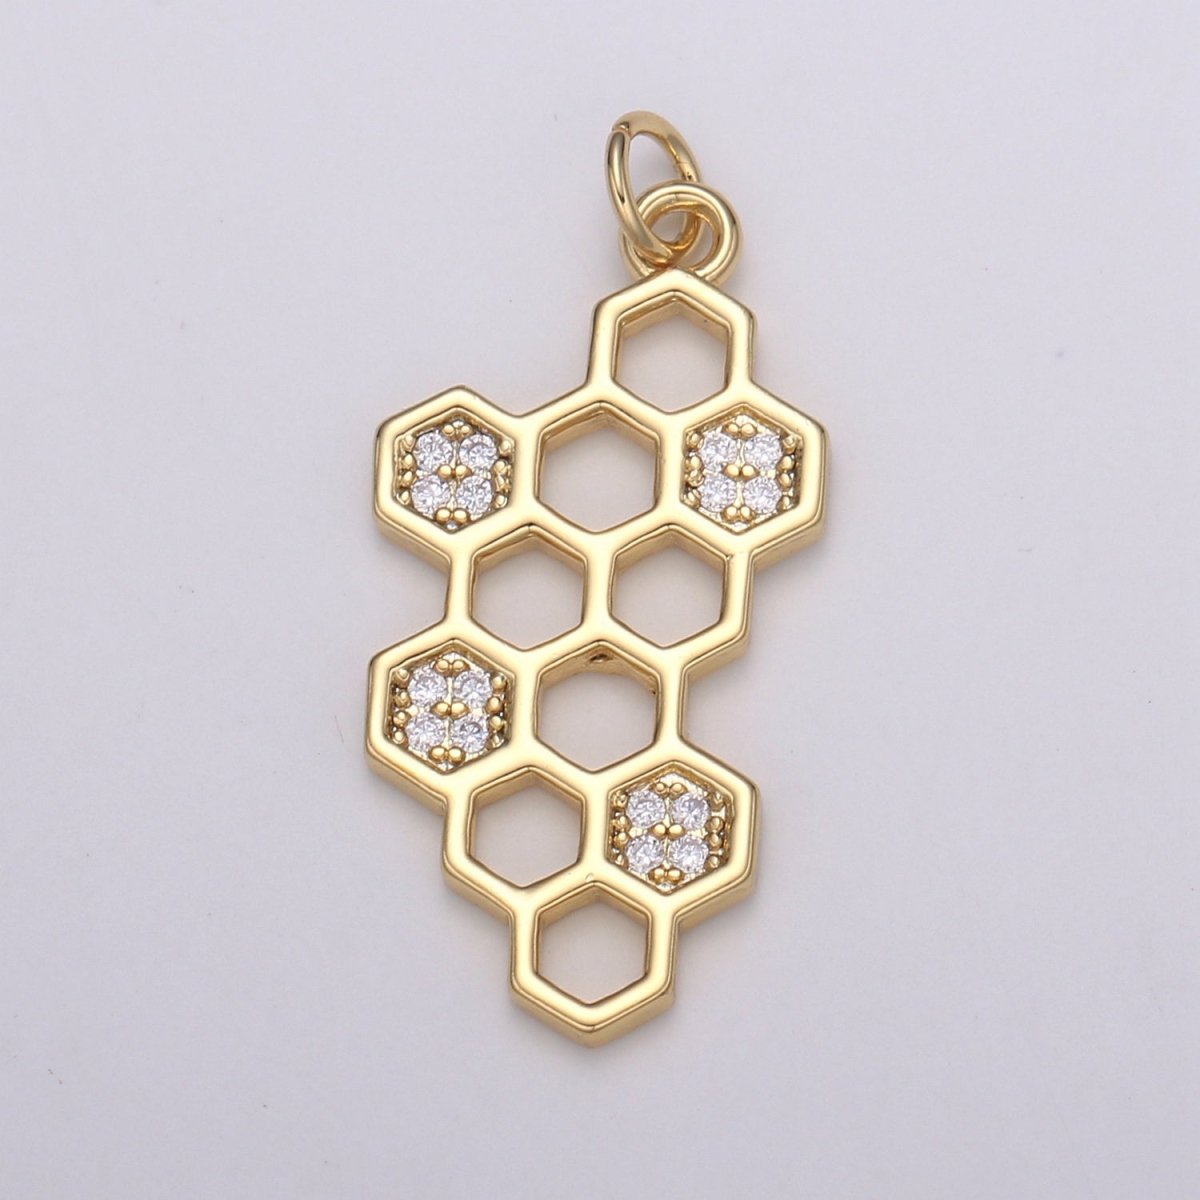 OS Dainty 18K Gold Filled Crystal Honeycomb Charm E-194 - DLUXCA